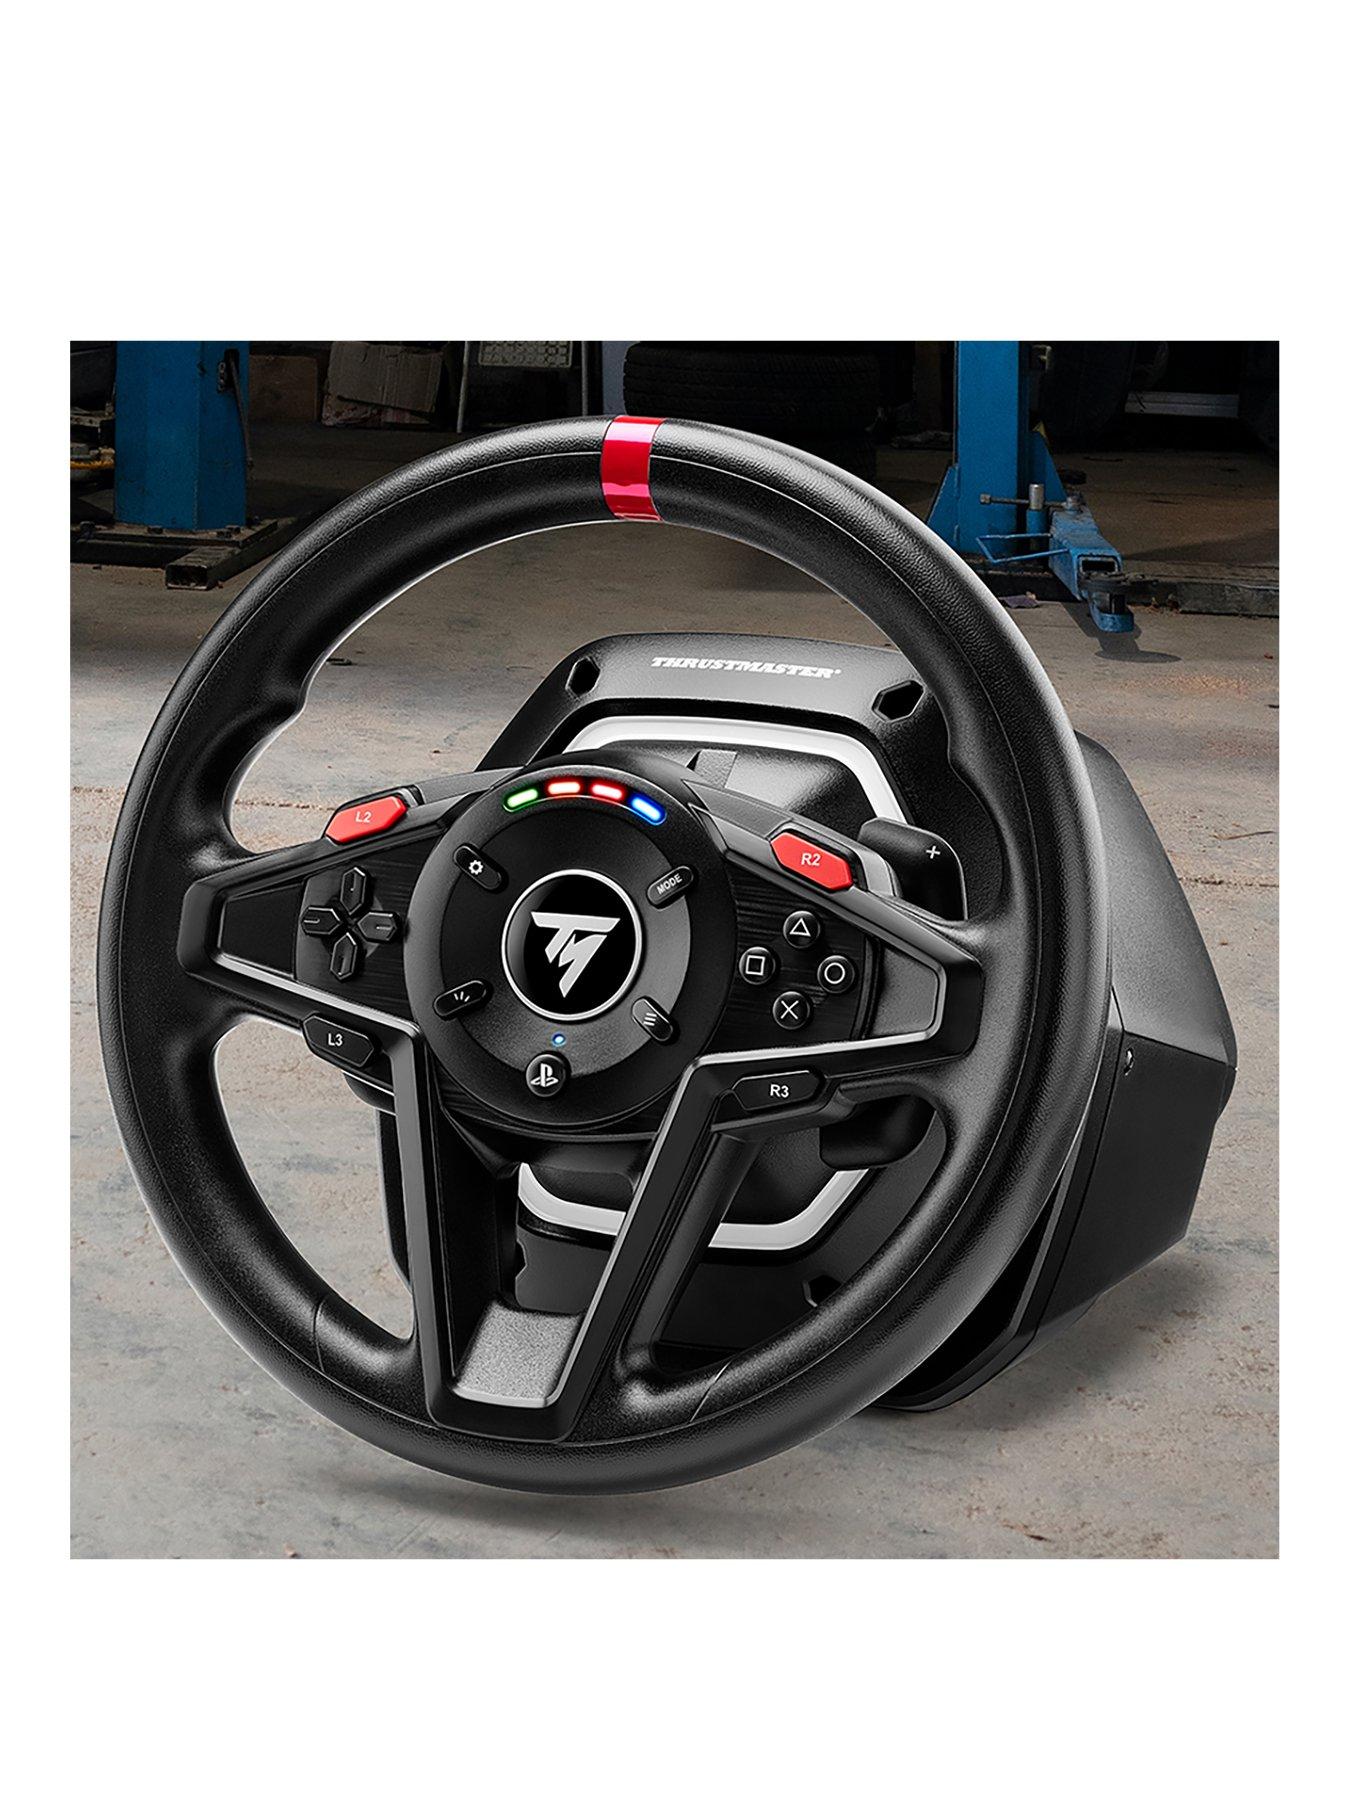 Thrustmaster T128 Review - The Perfect Wheel For Beginners? 